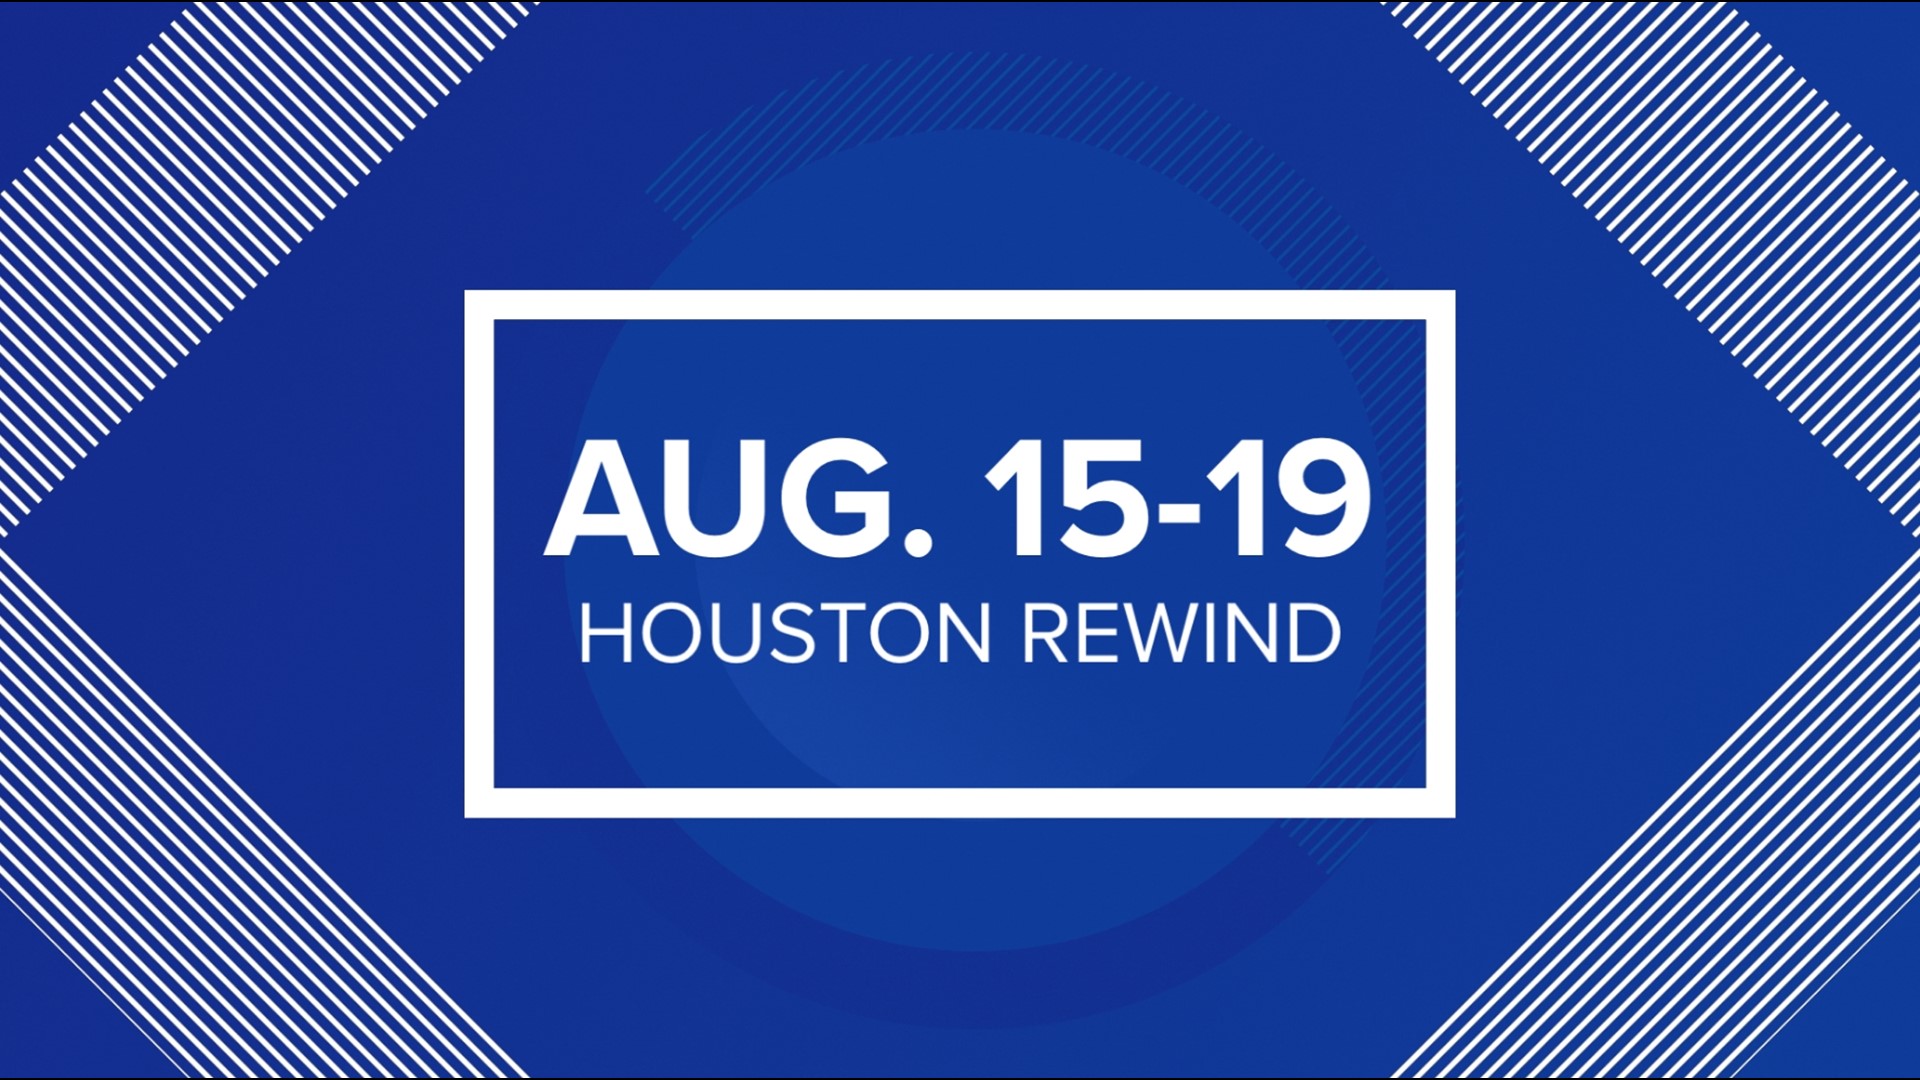 Catch up on the Houston-area news stories you may have missed this week!